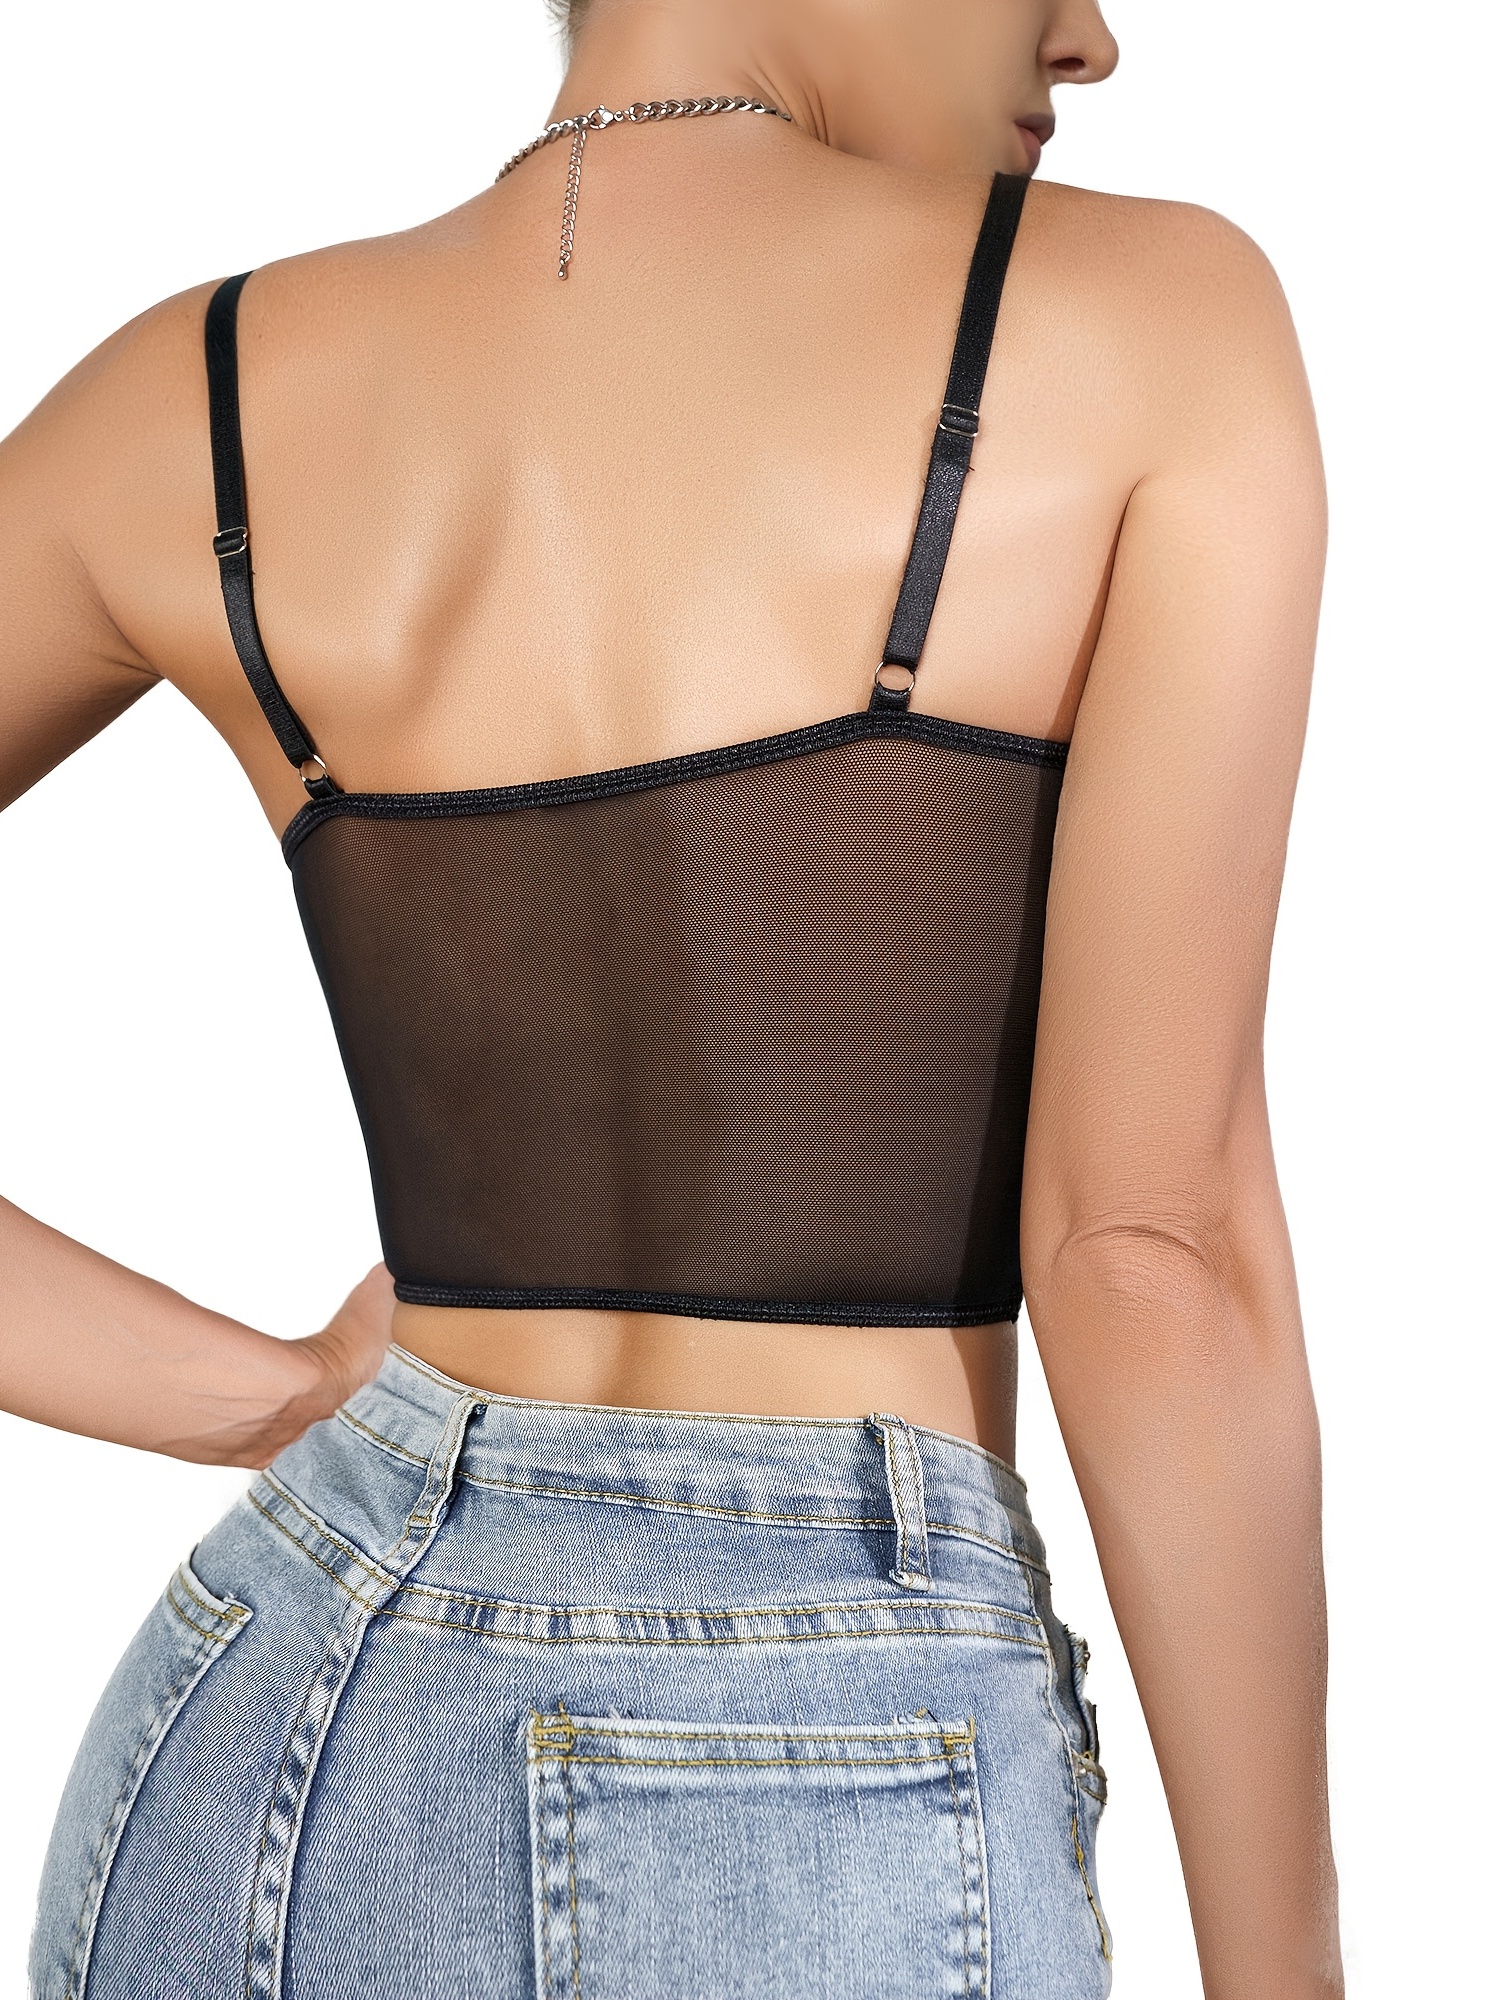 Sexy Crop Tops for Women Adjustable Spaghetti Strap Camisole Tops